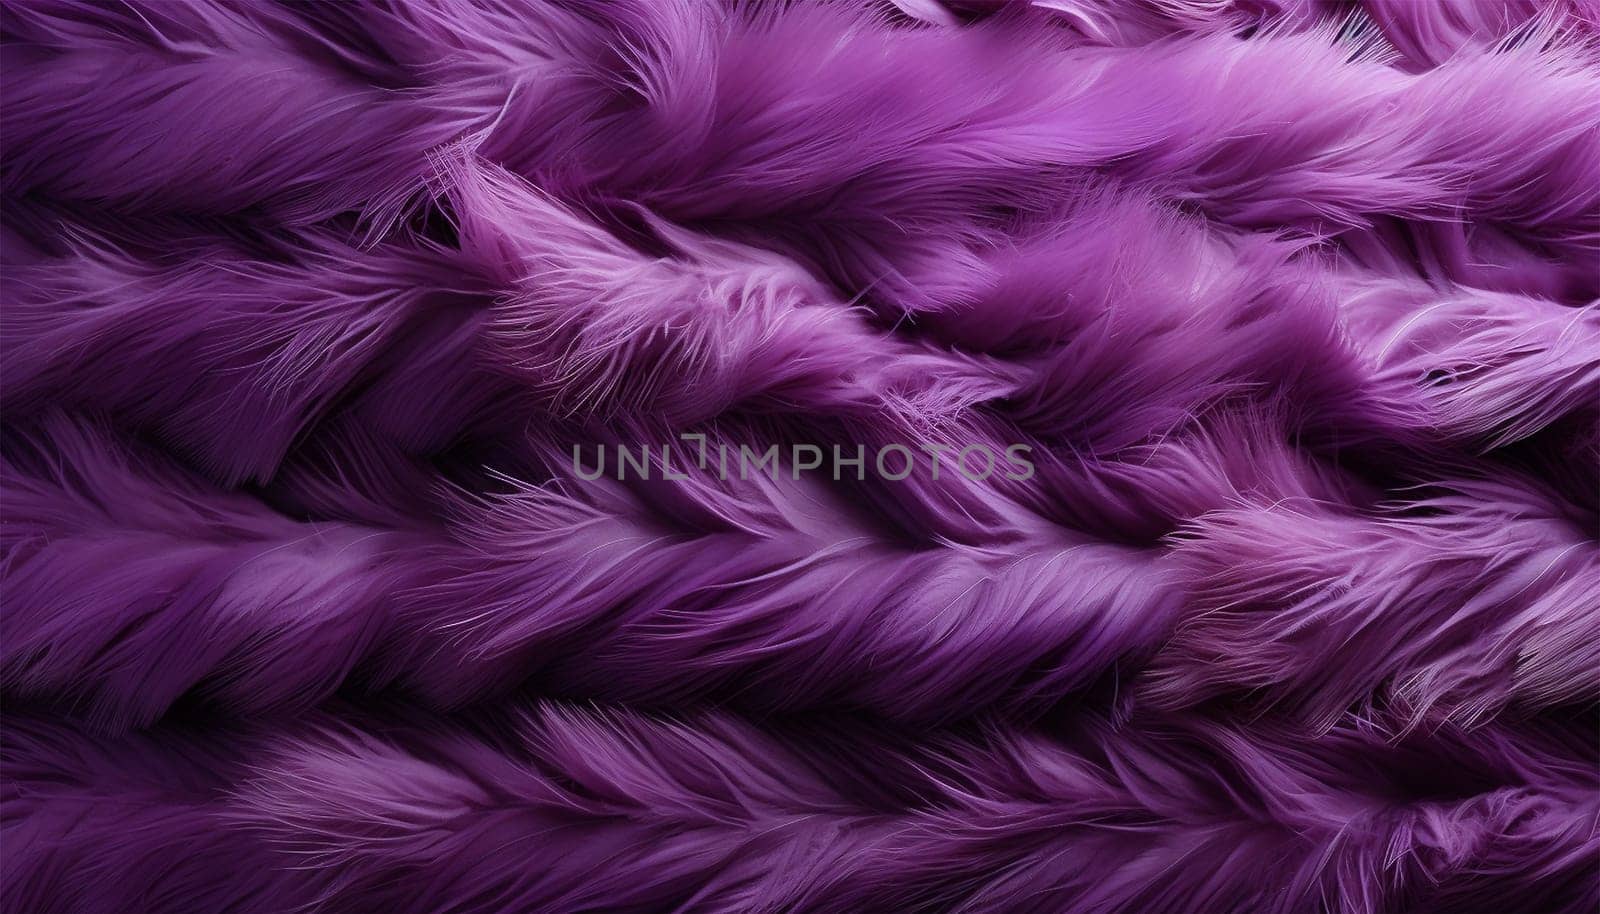 Purple fur texture. Violet glamorous background texture, Violet velvet fabric. Trendy stylish lavender colored. Soft material. Abstract background by Annebel146